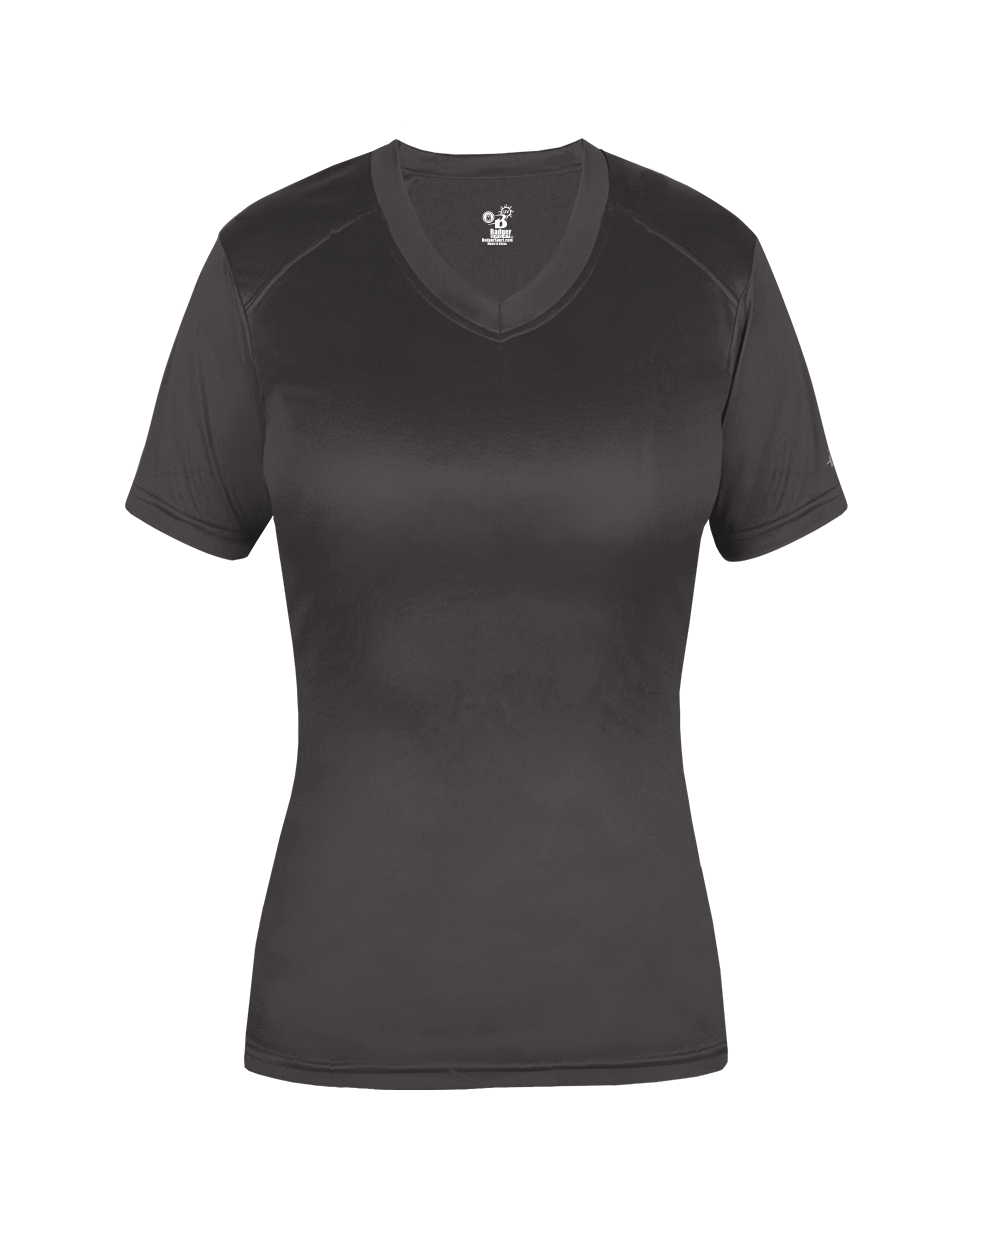 Ultimate Softlock Fitted Women's Jersey